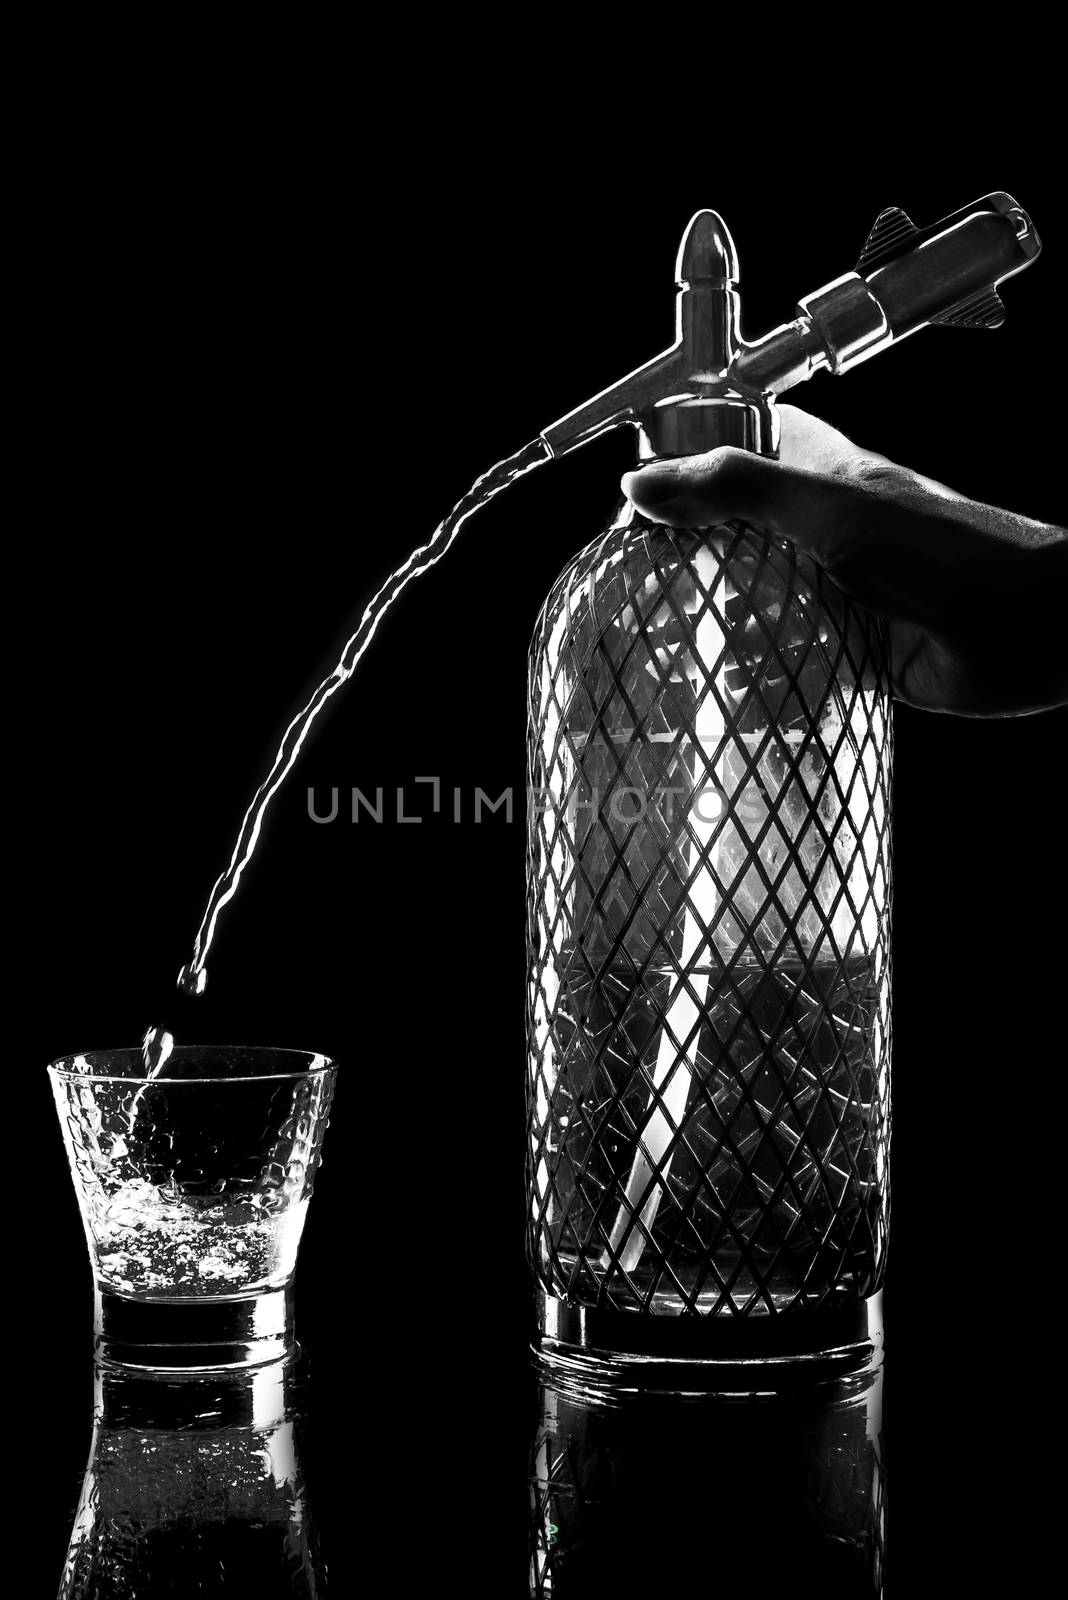 a siphon of soda by Andreua